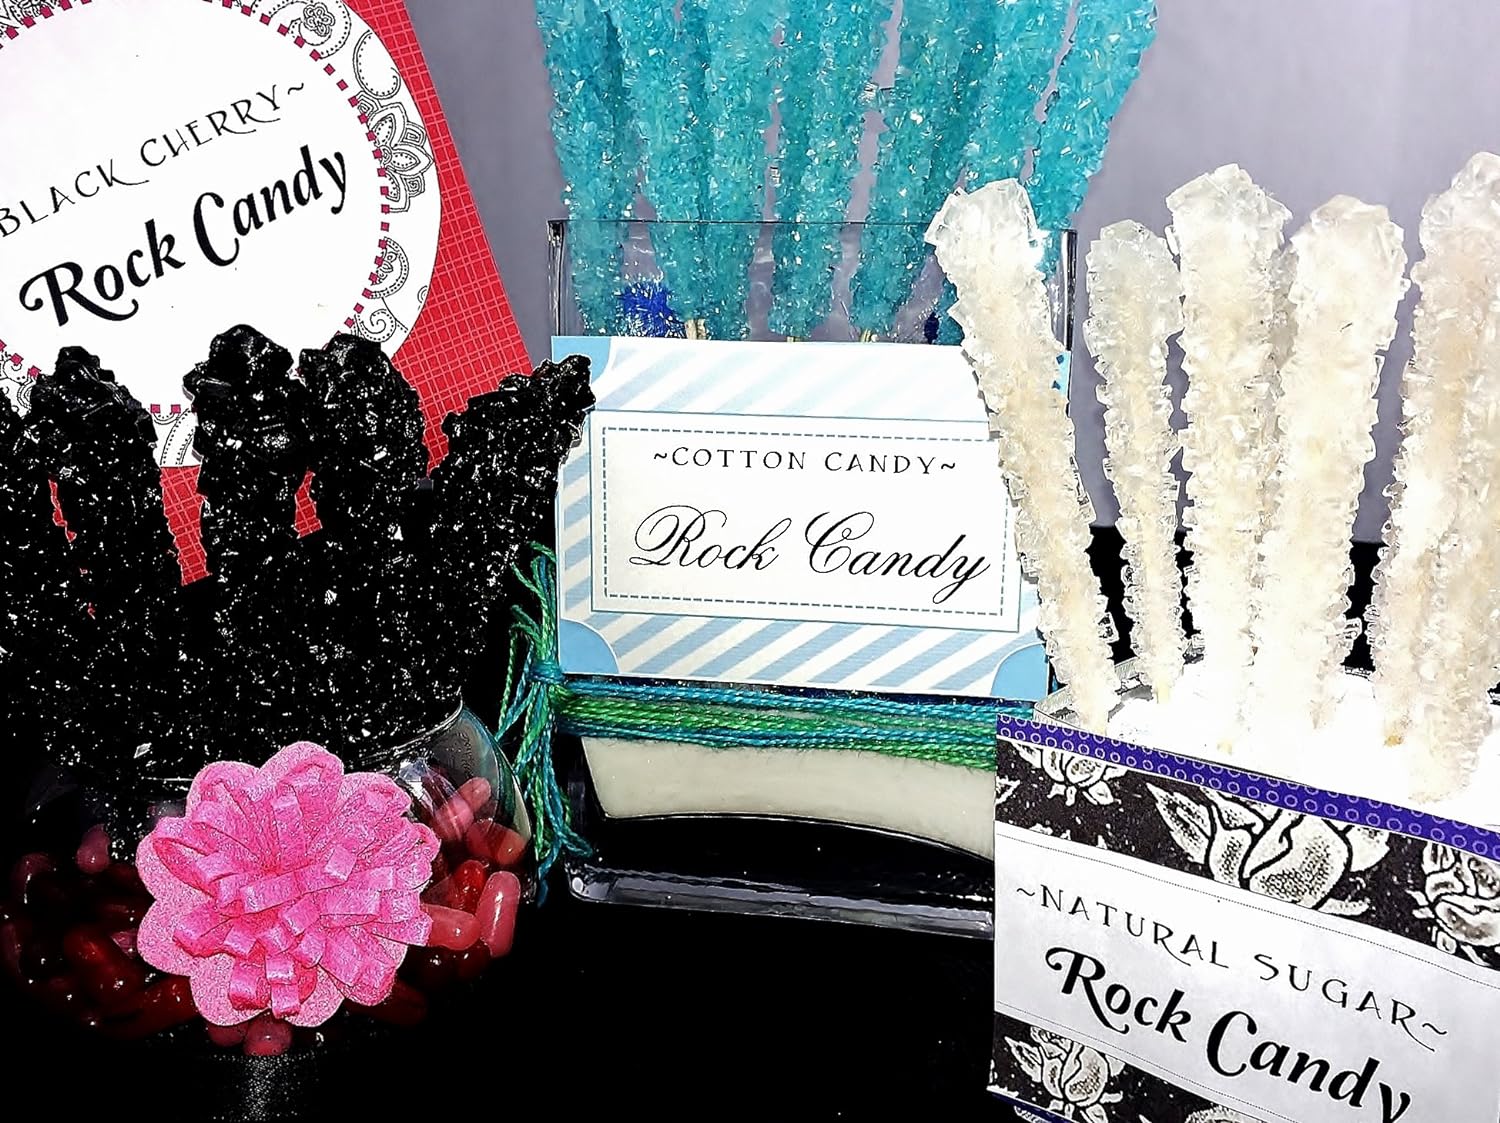  Candy Buffet Store Large White Rock Candy - 12 Pack Sugar Flavored - How To Build a Candy Buffet Table Guide Included